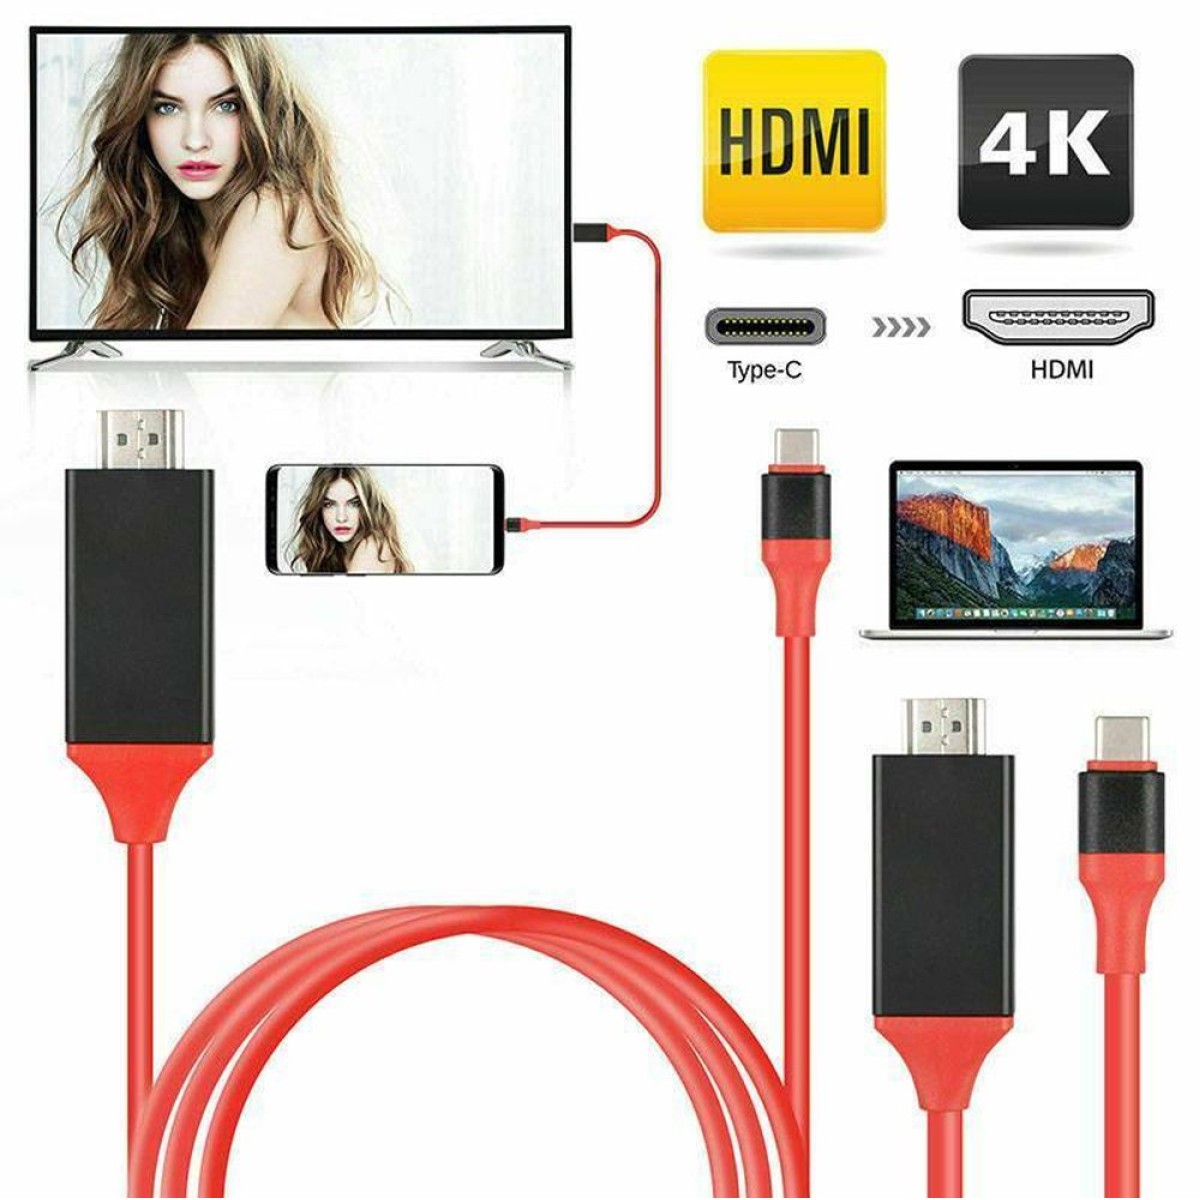 POWERMASTER PM-6019 USB Type-C To HDMI + USB Converter Cable 2m